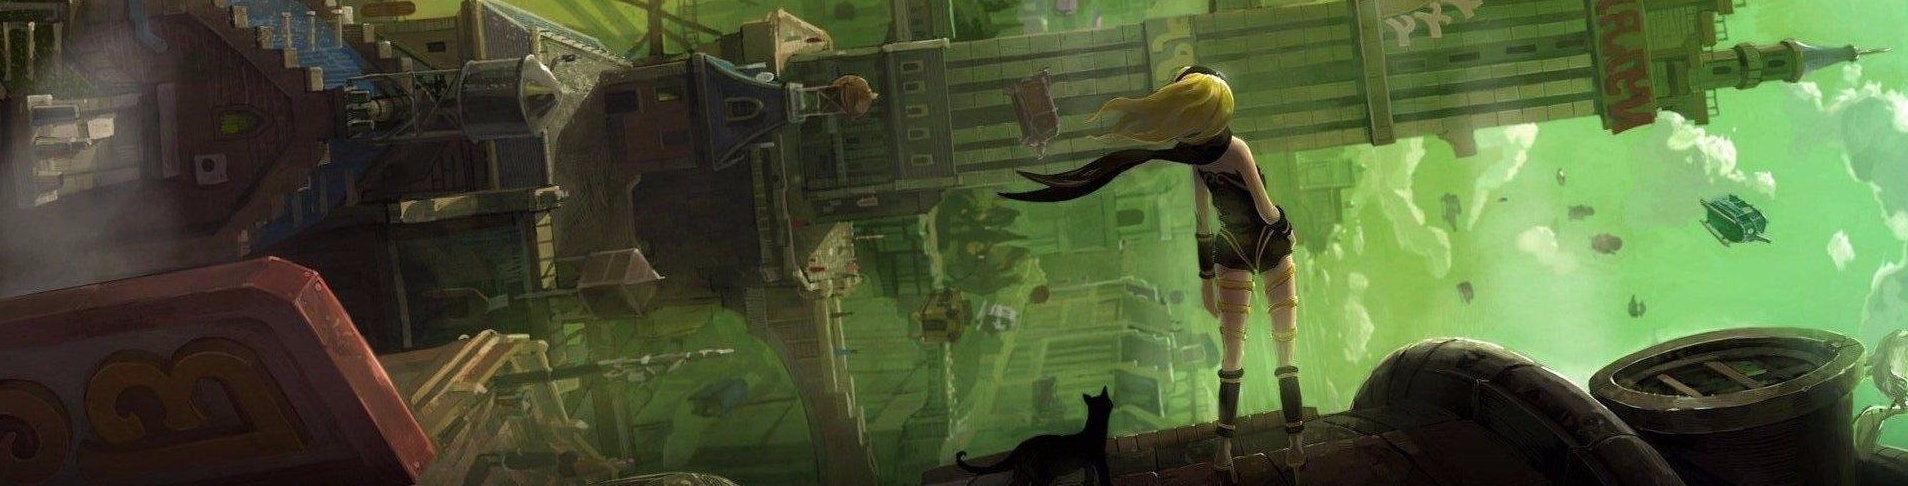 Image for Gravity Rush Remastered review